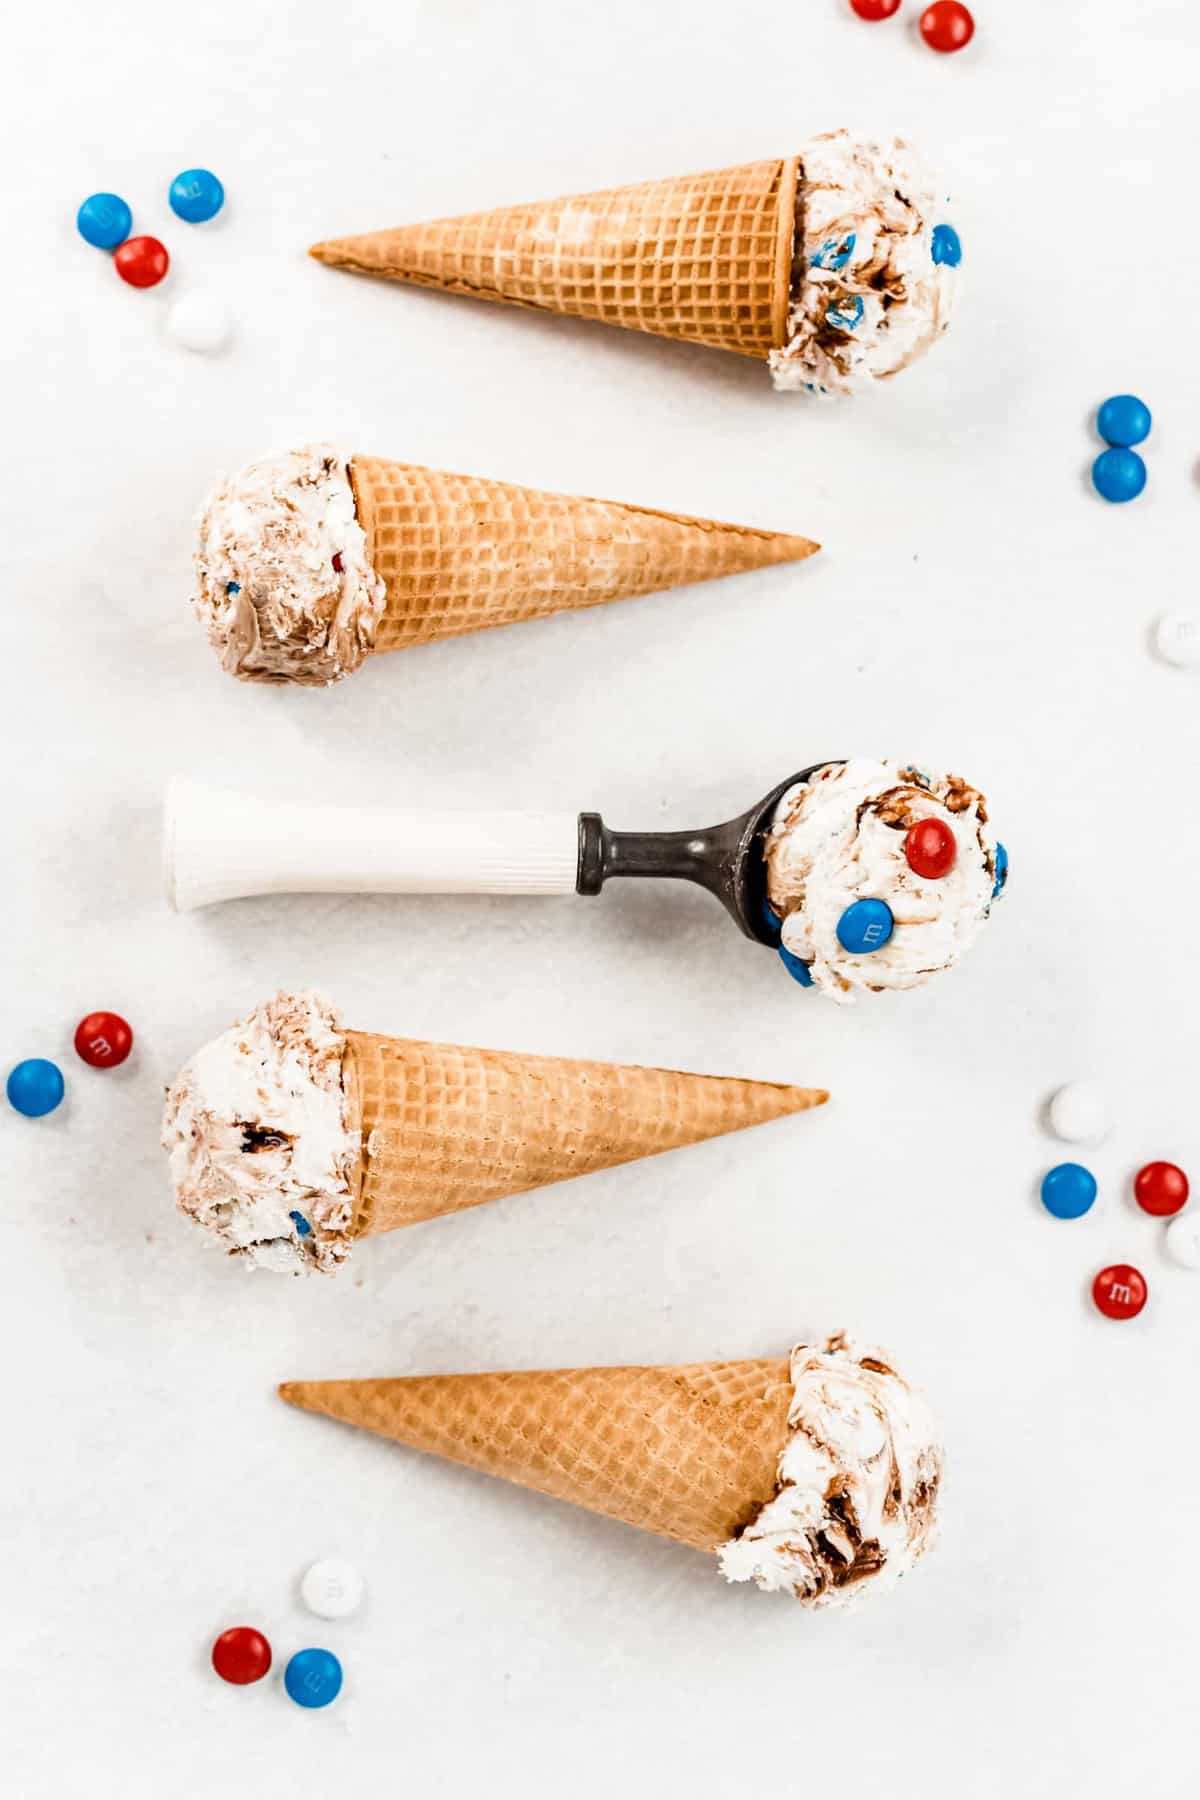 Creamy vanilla ice cream with fudgy chocolate swirls and milk chocolate M&M’S will be your new summer dessert! This No-Churn Fudge Ripple M&M Ice Cream is rich, smooth, and only takes a few minutes to prepare. #icecream #nochurnicecream #4thofjulyrecipe